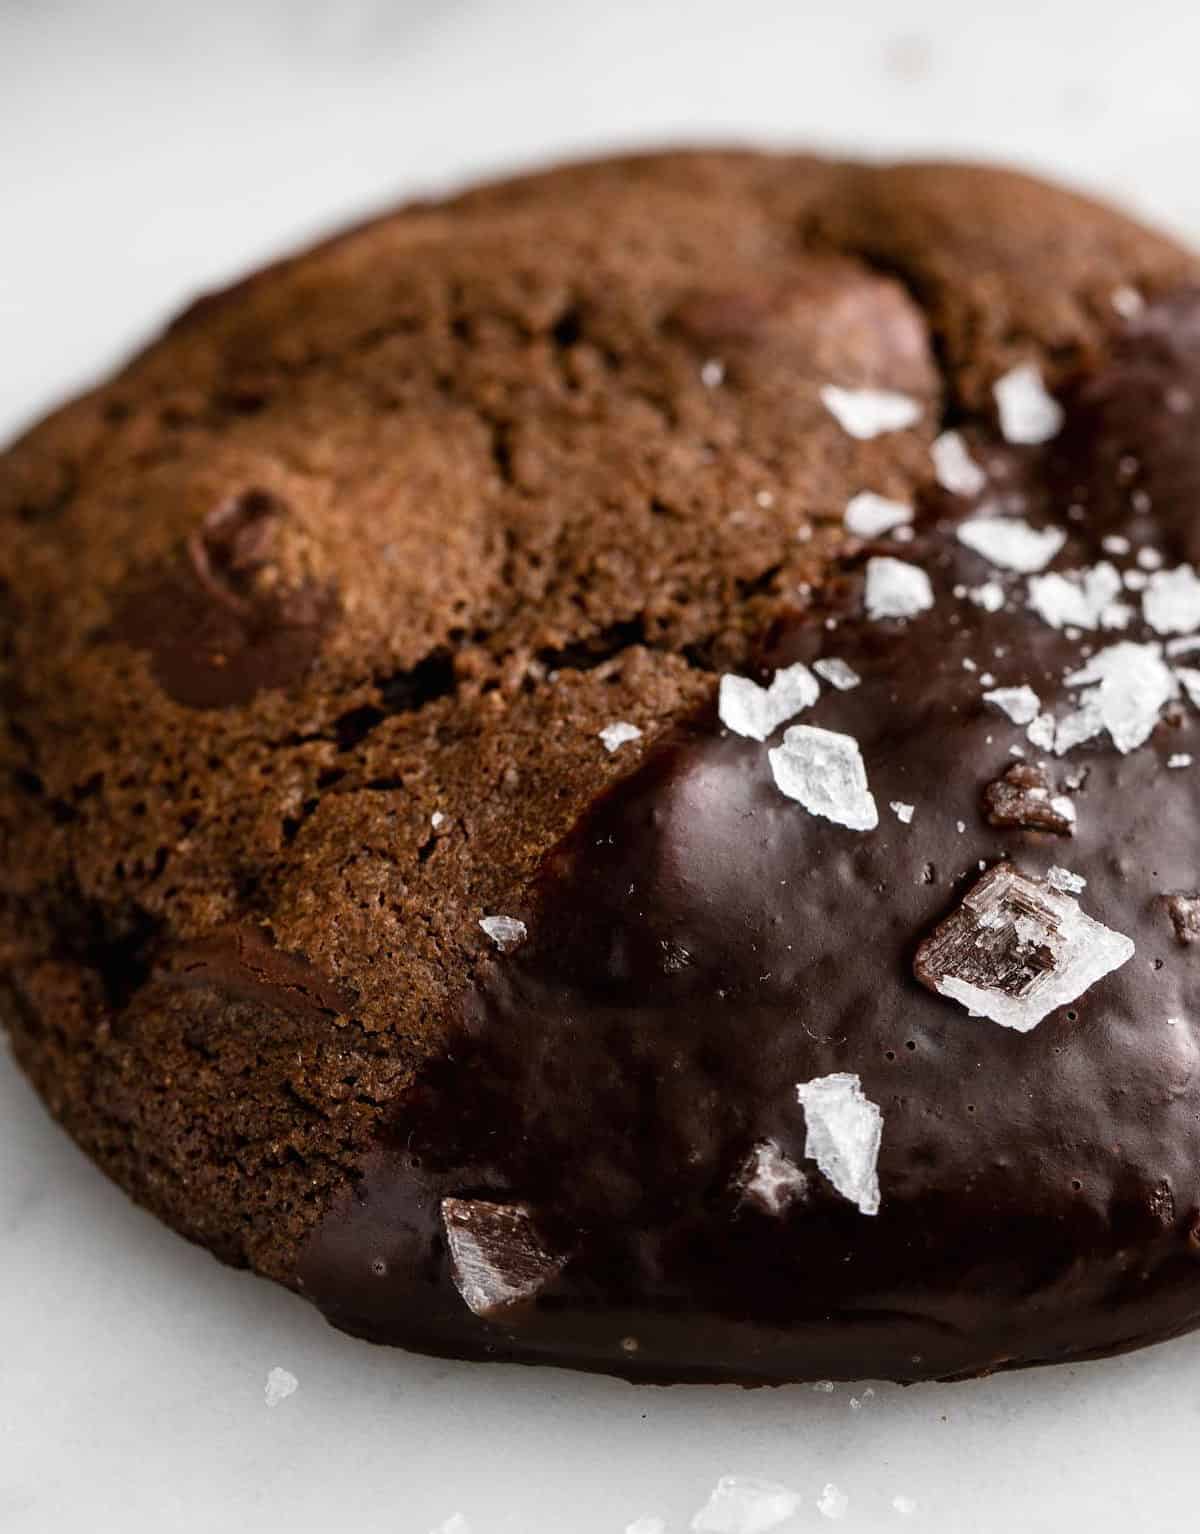  These cookies are an explosion of chocolate in every bite.